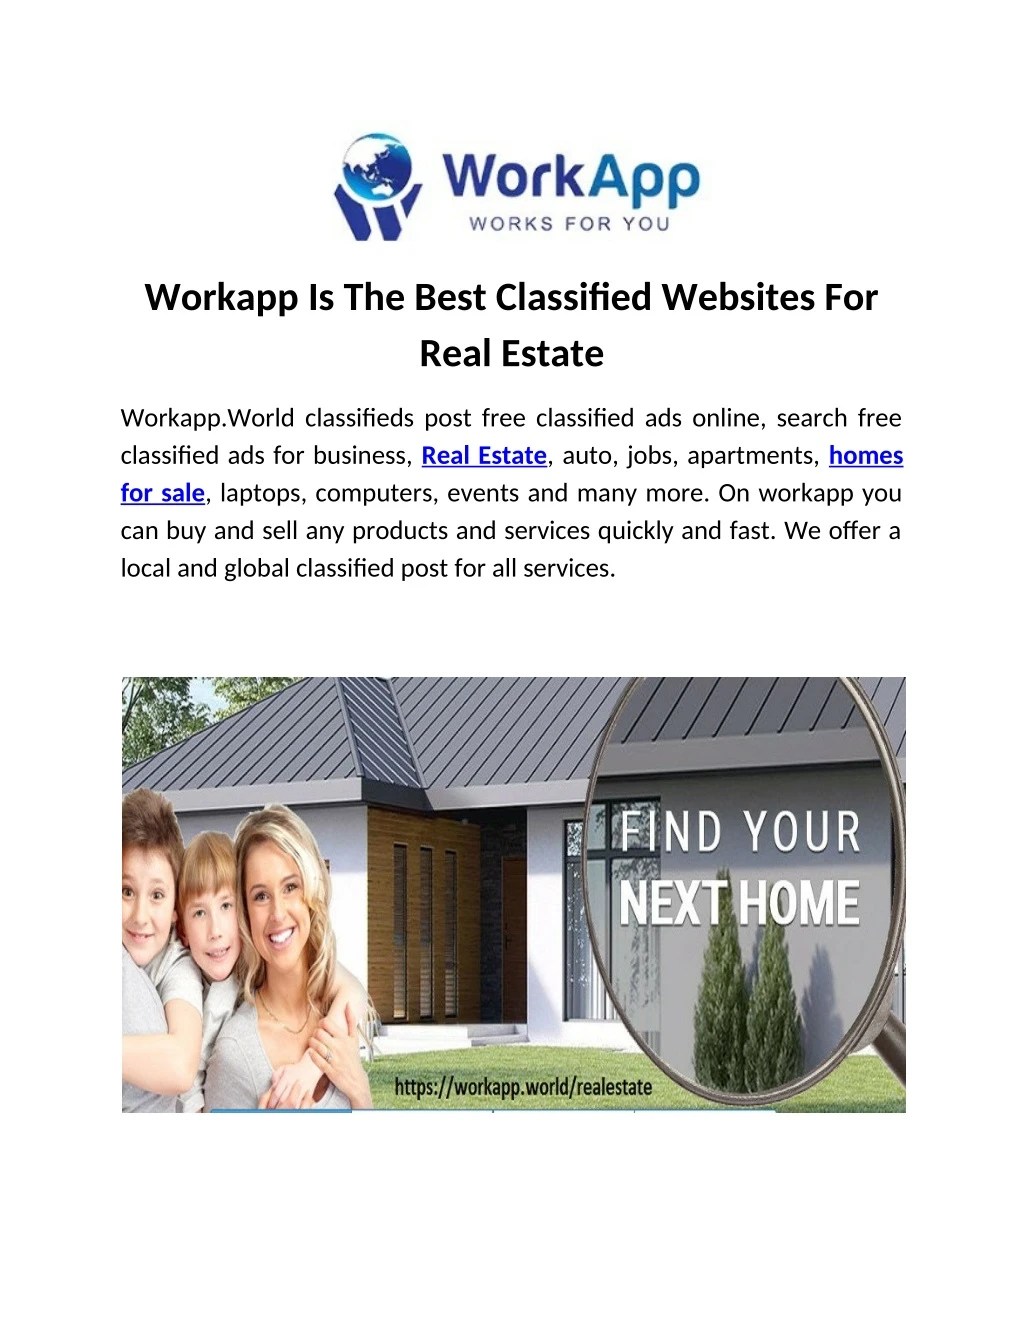 workapp is the best classified websites for real